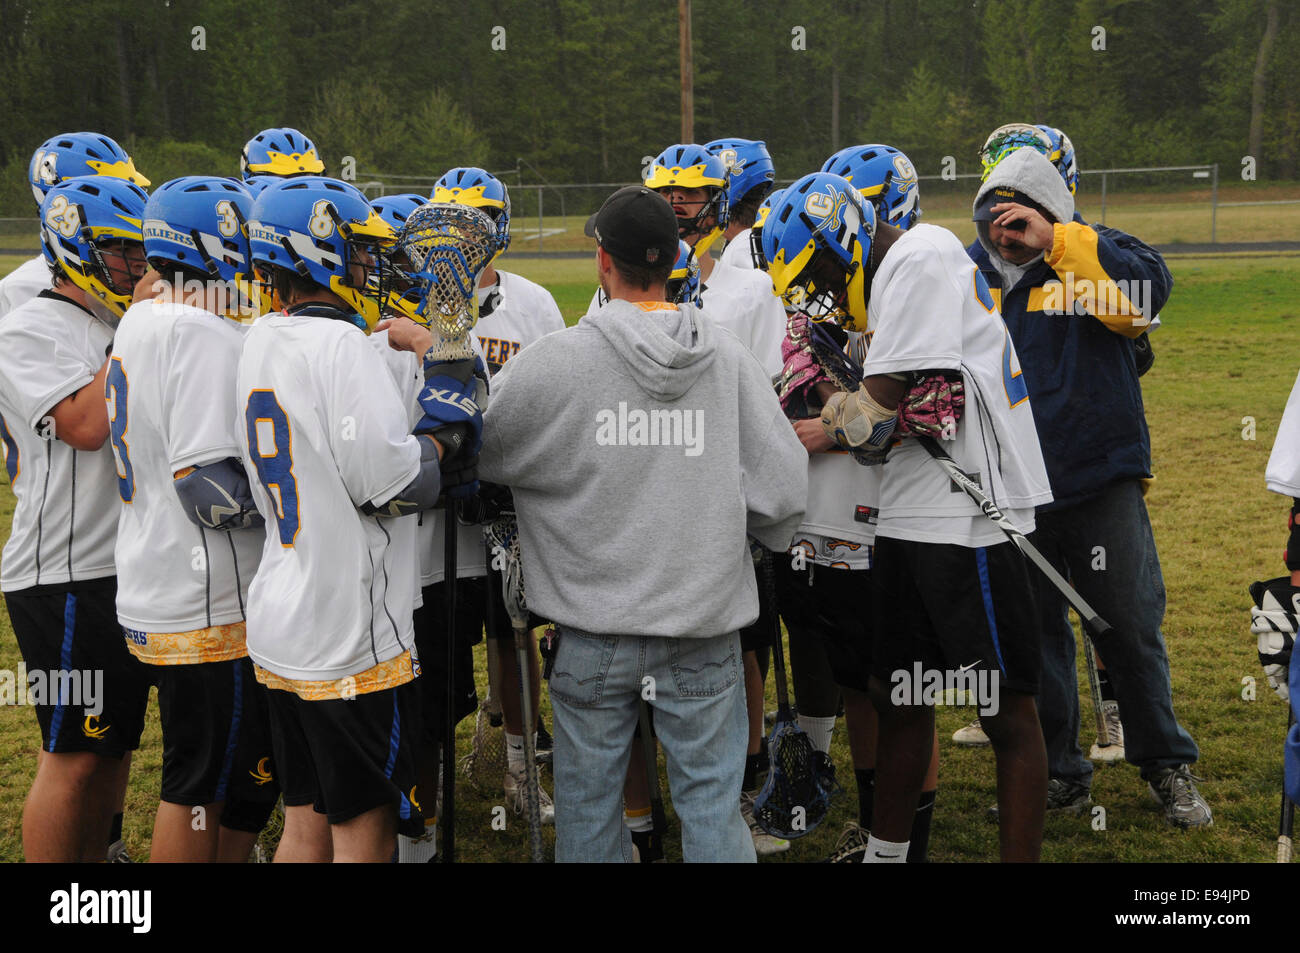 Coach talking to his team of lacrosse players Stock Photo